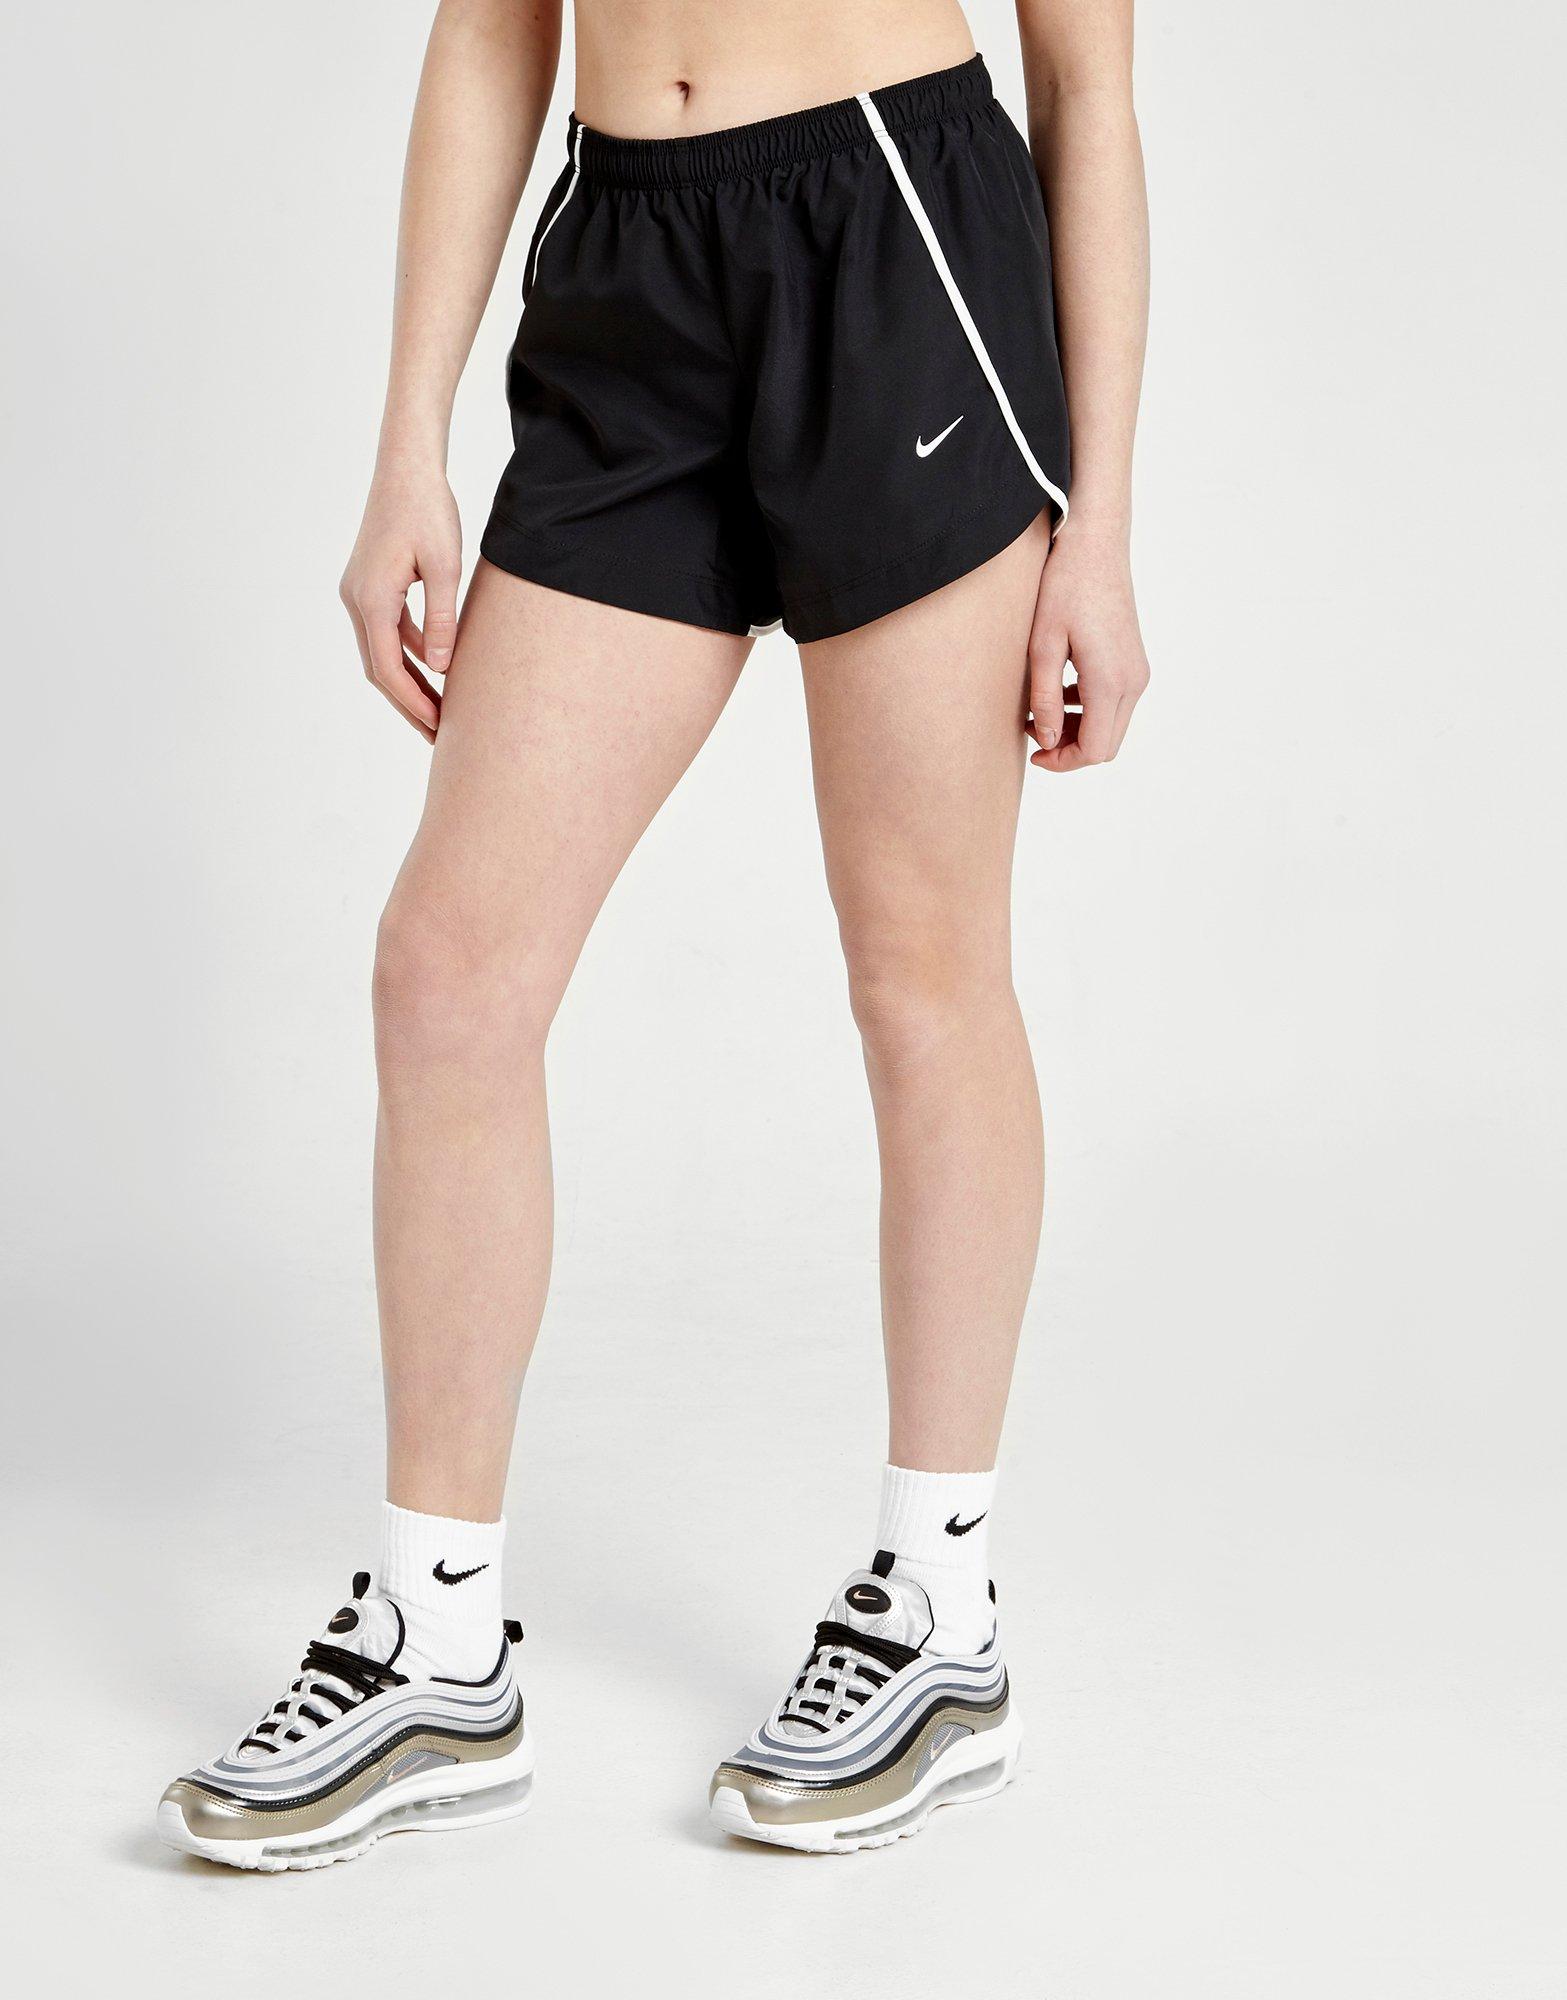 dri fit shorts for girls